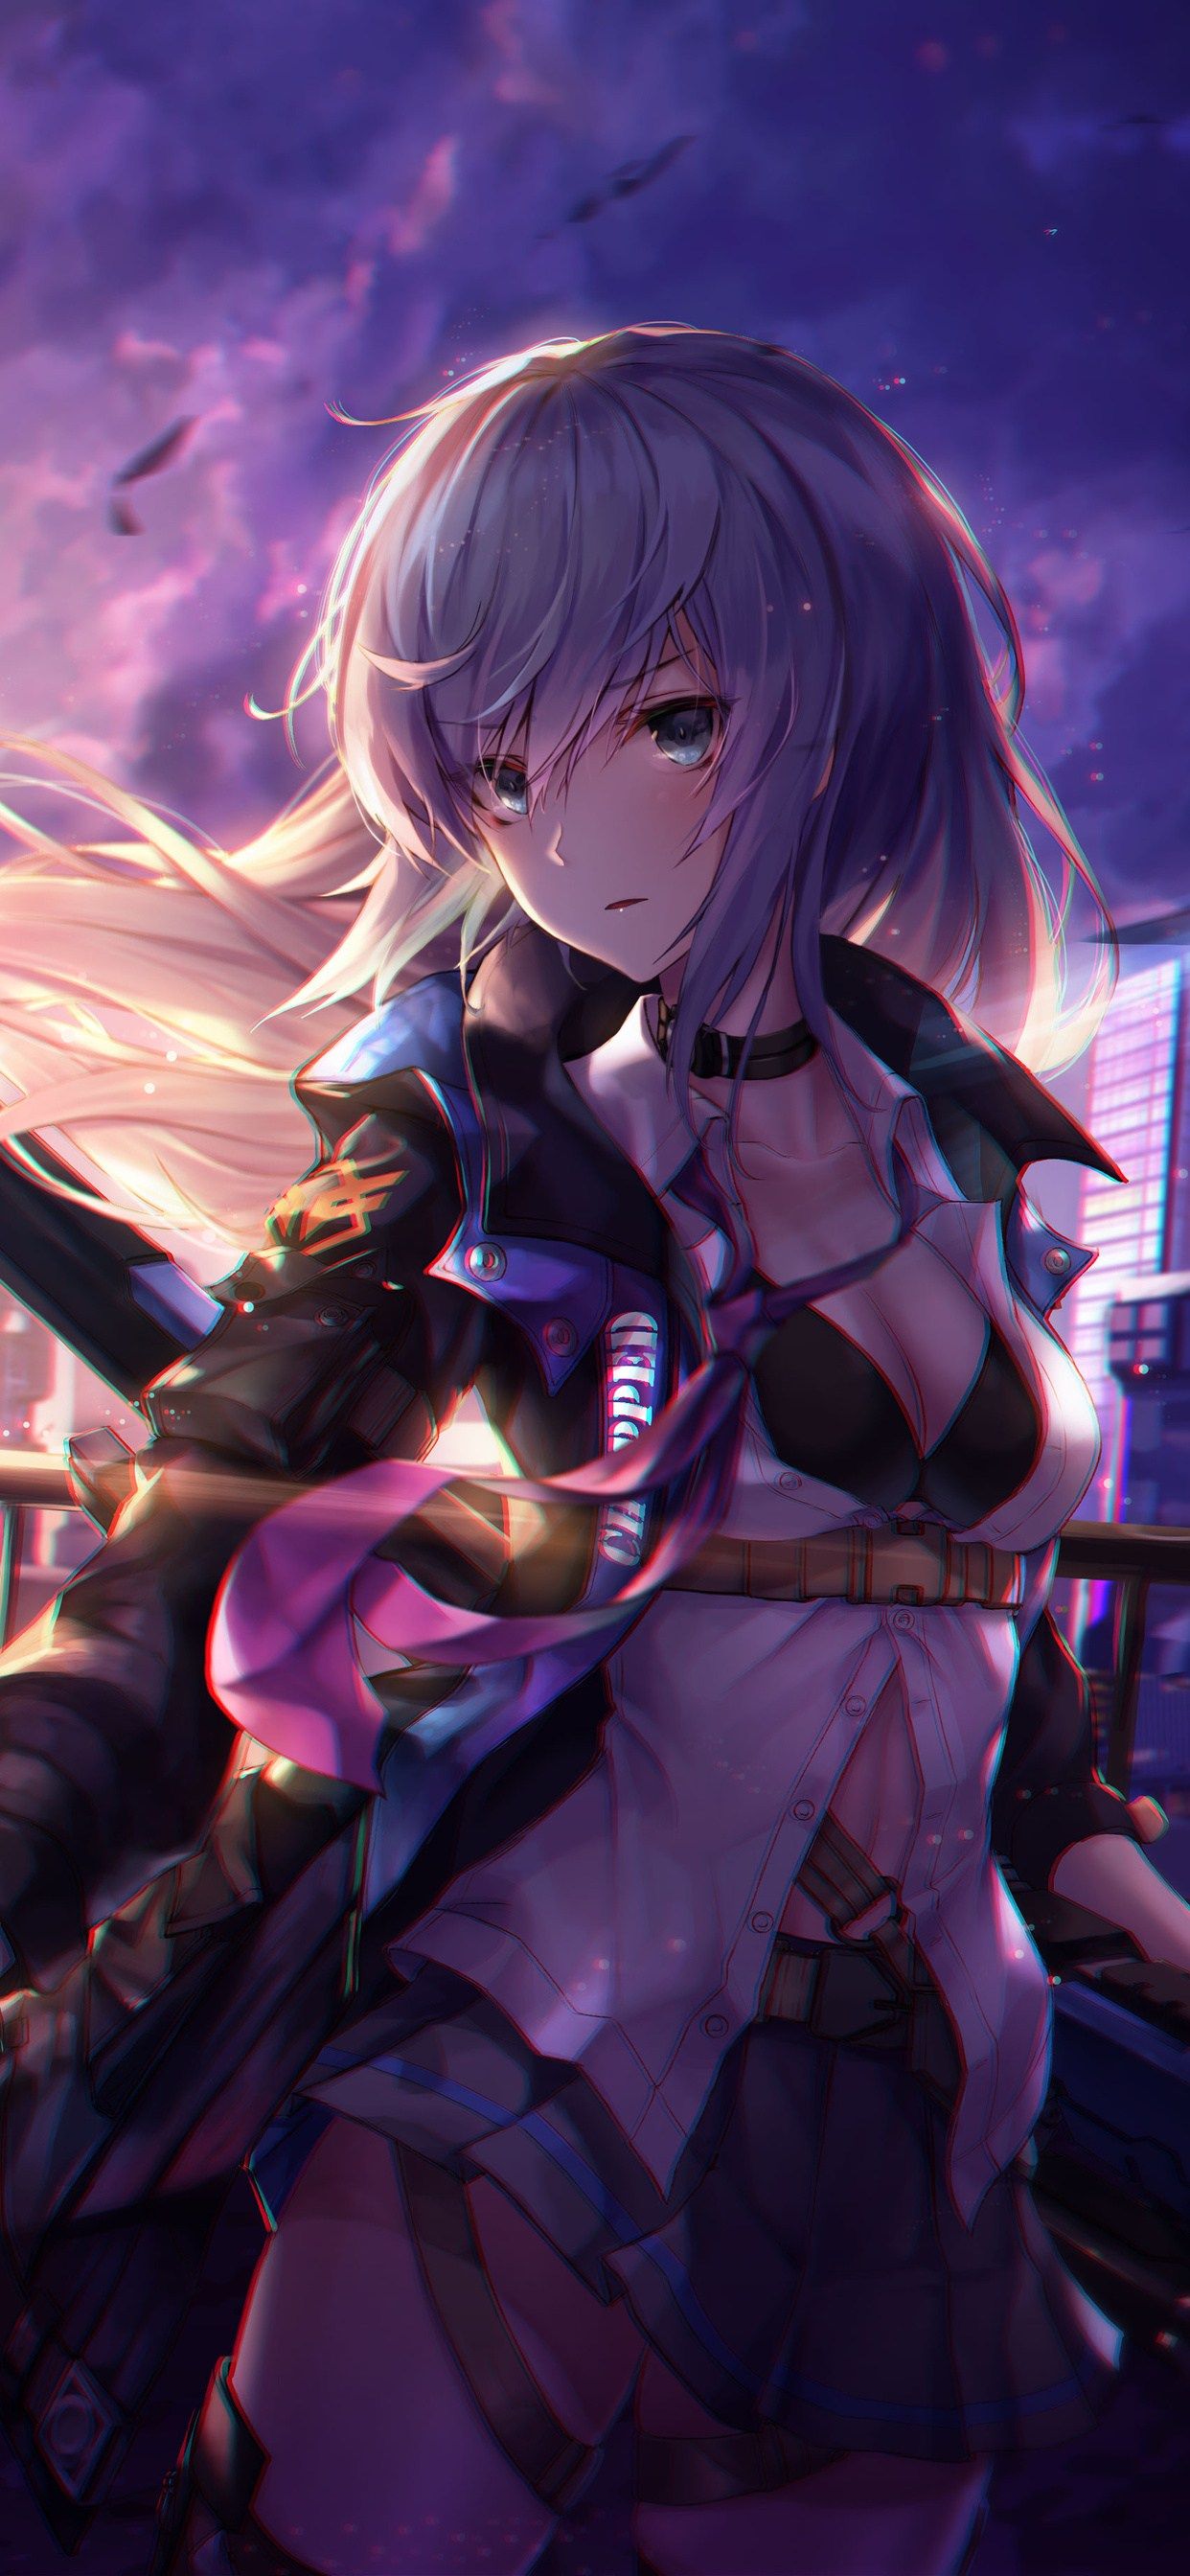 Anime Wallpapers 4K Iphone 